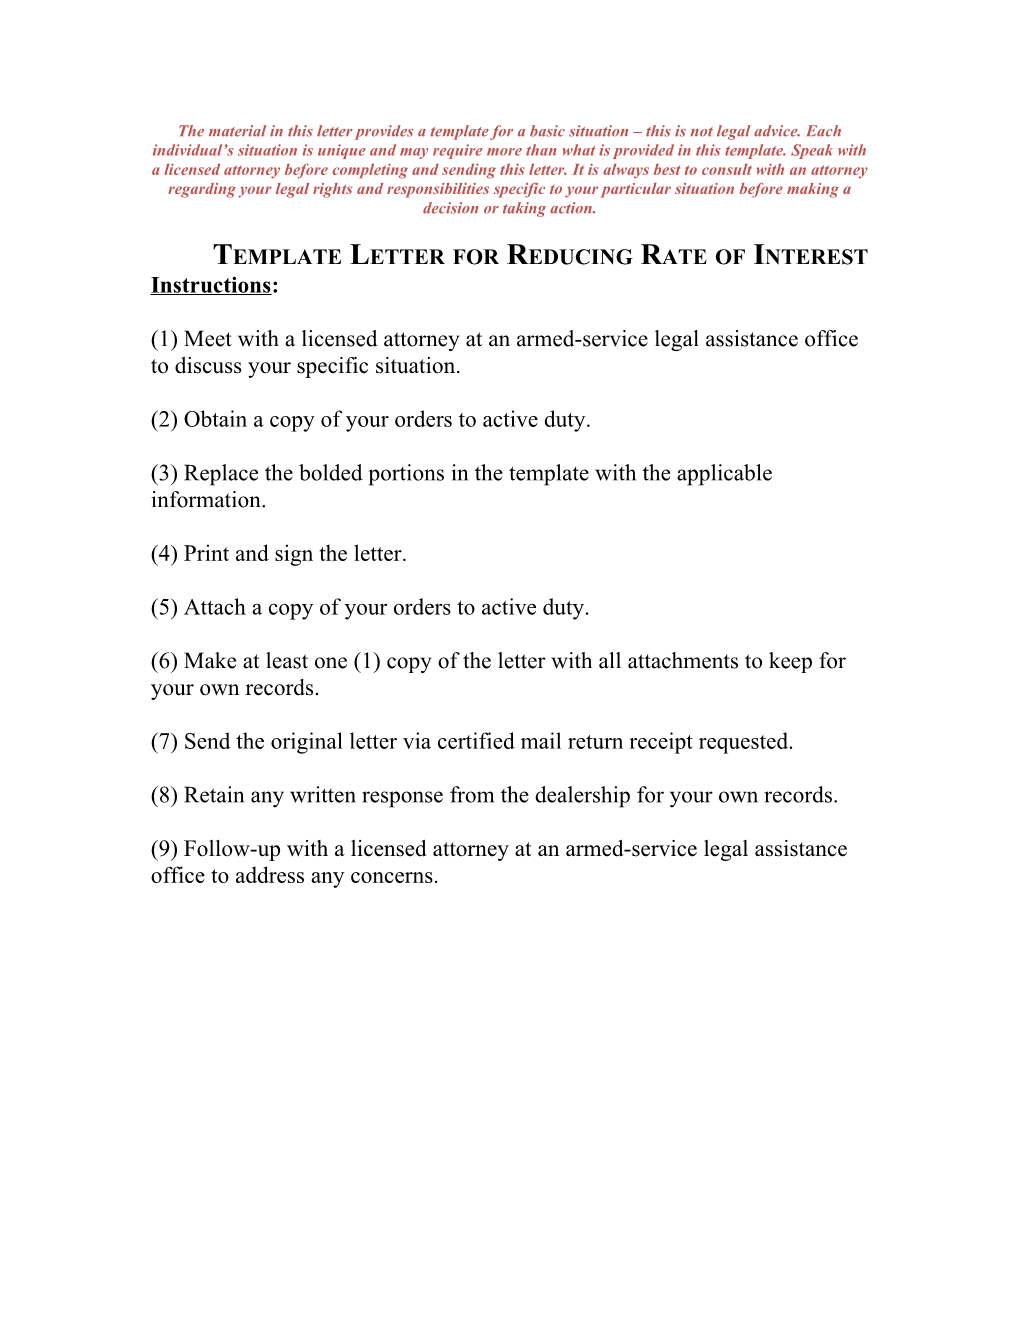 Template Letter for Reducing Rate of Interest